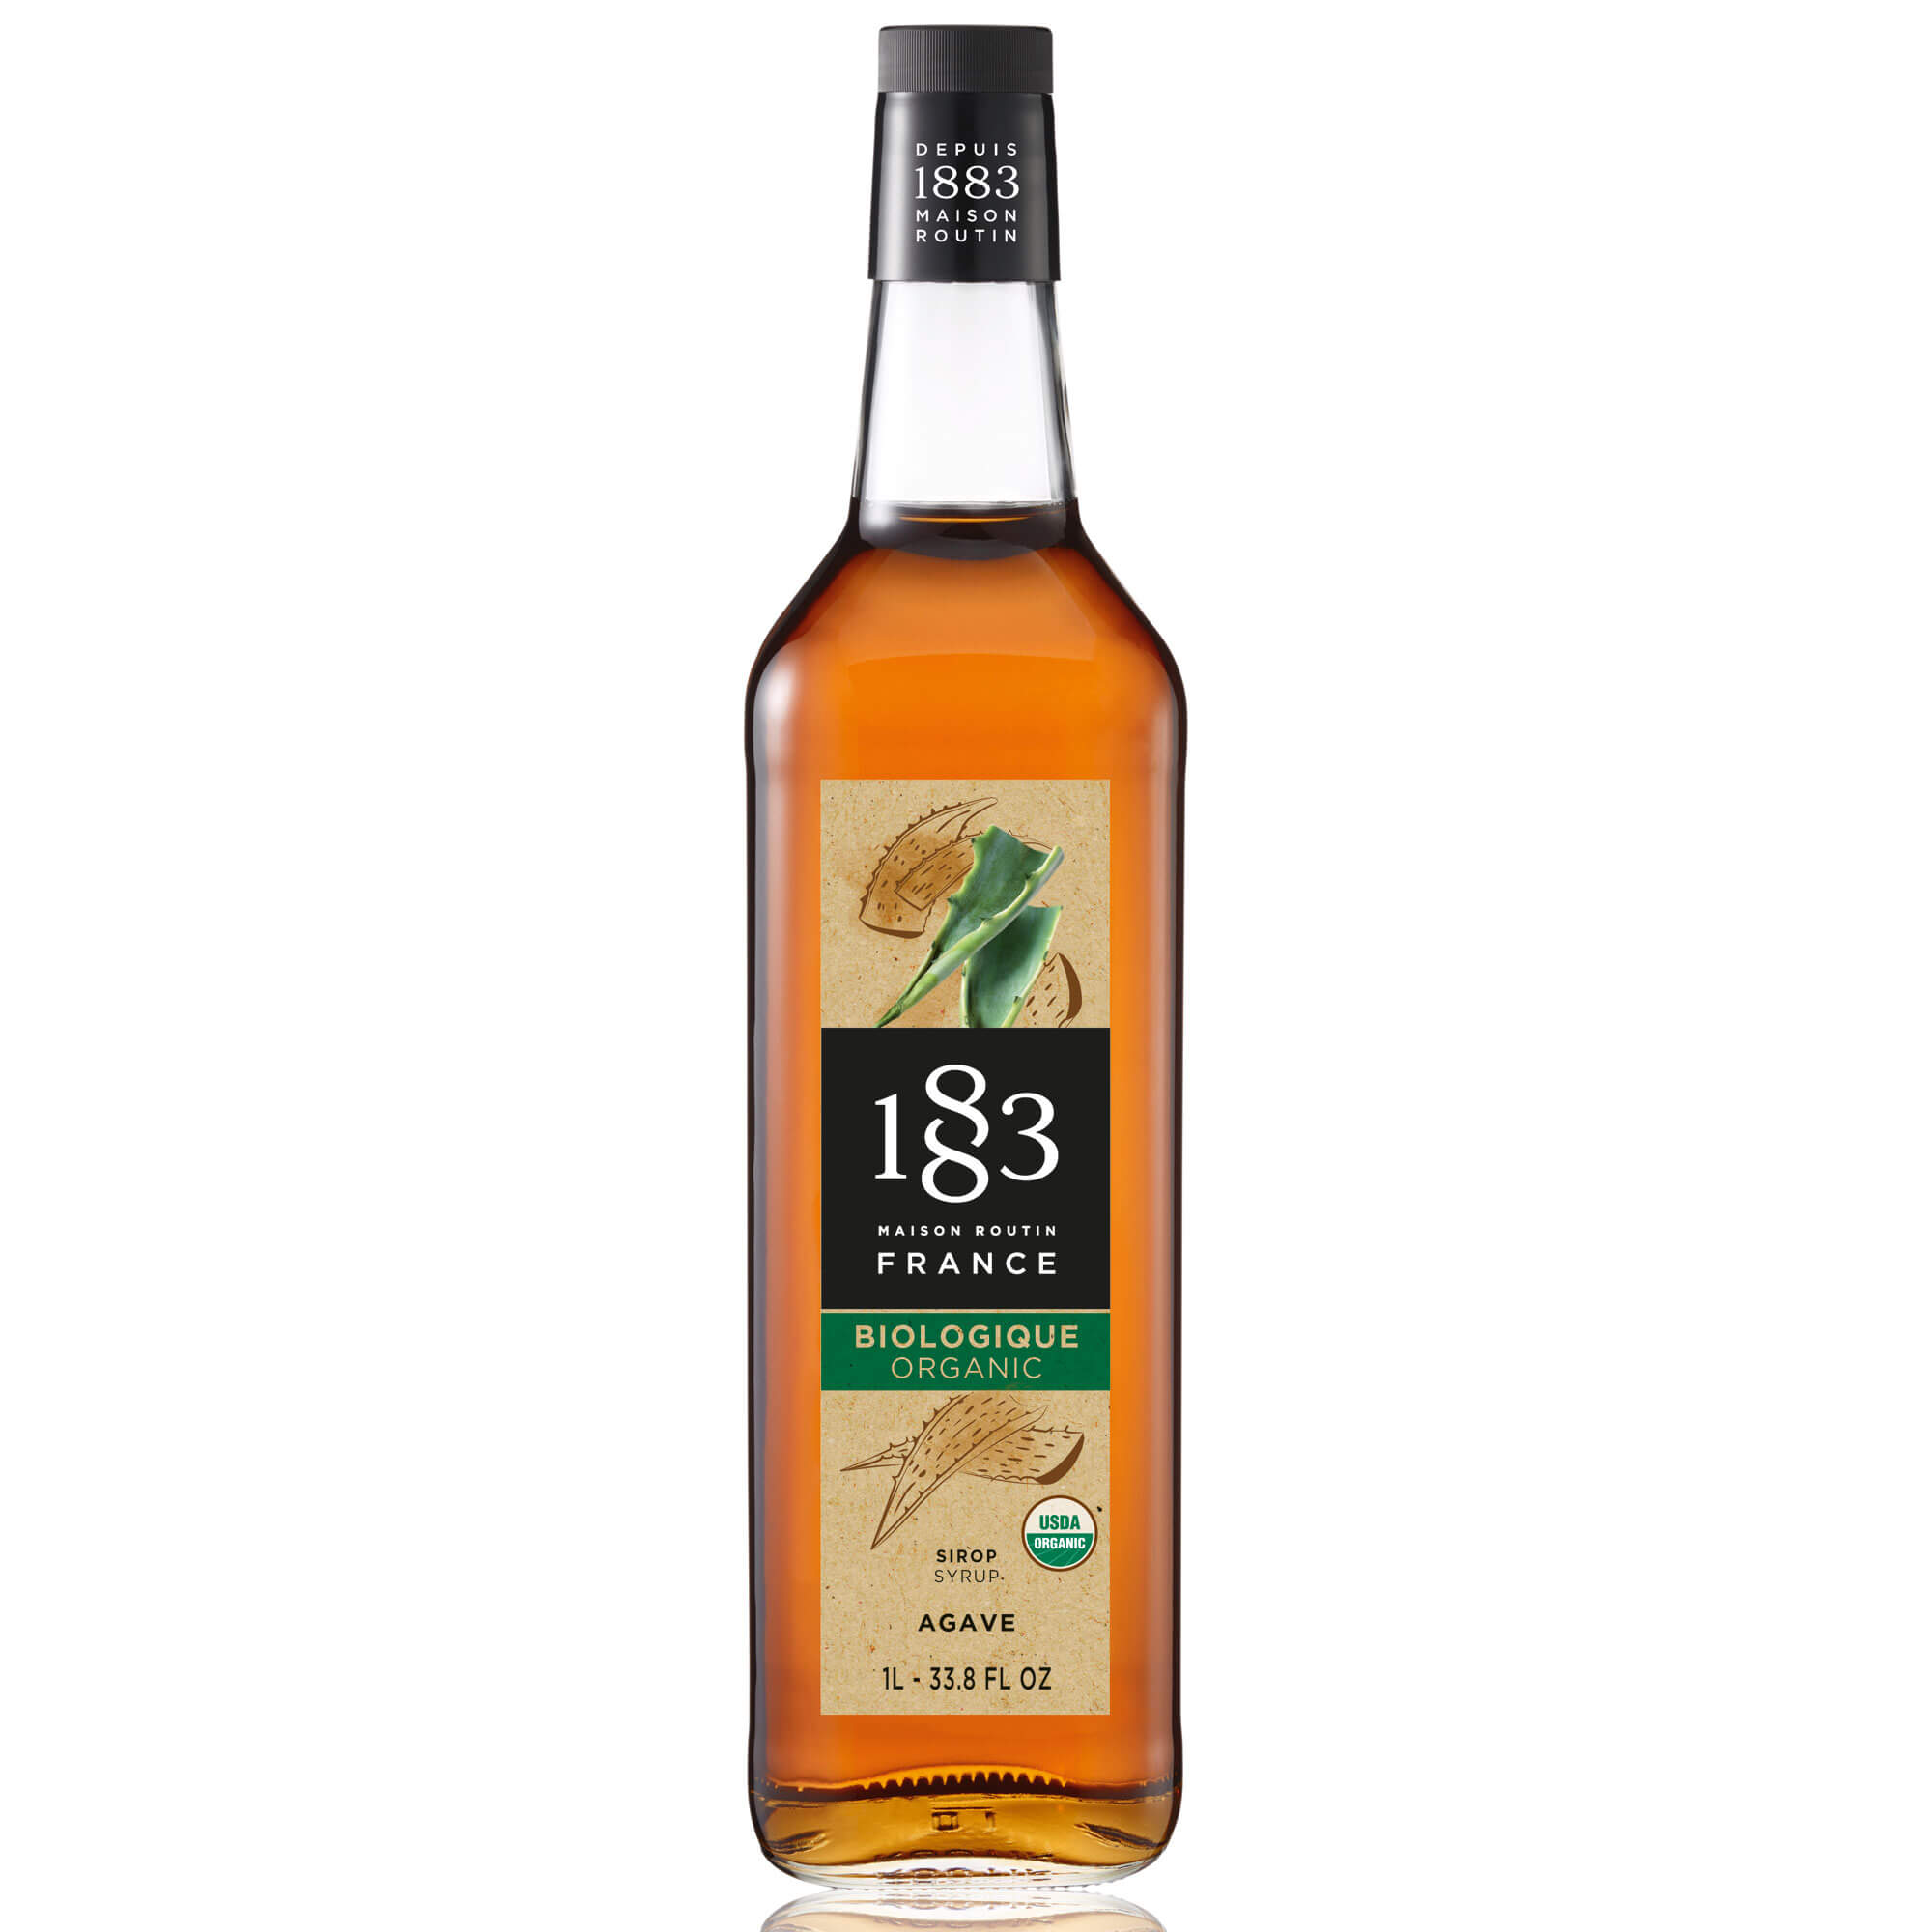 Agave organic - Maison Routin 1883 syrup (1,0l)